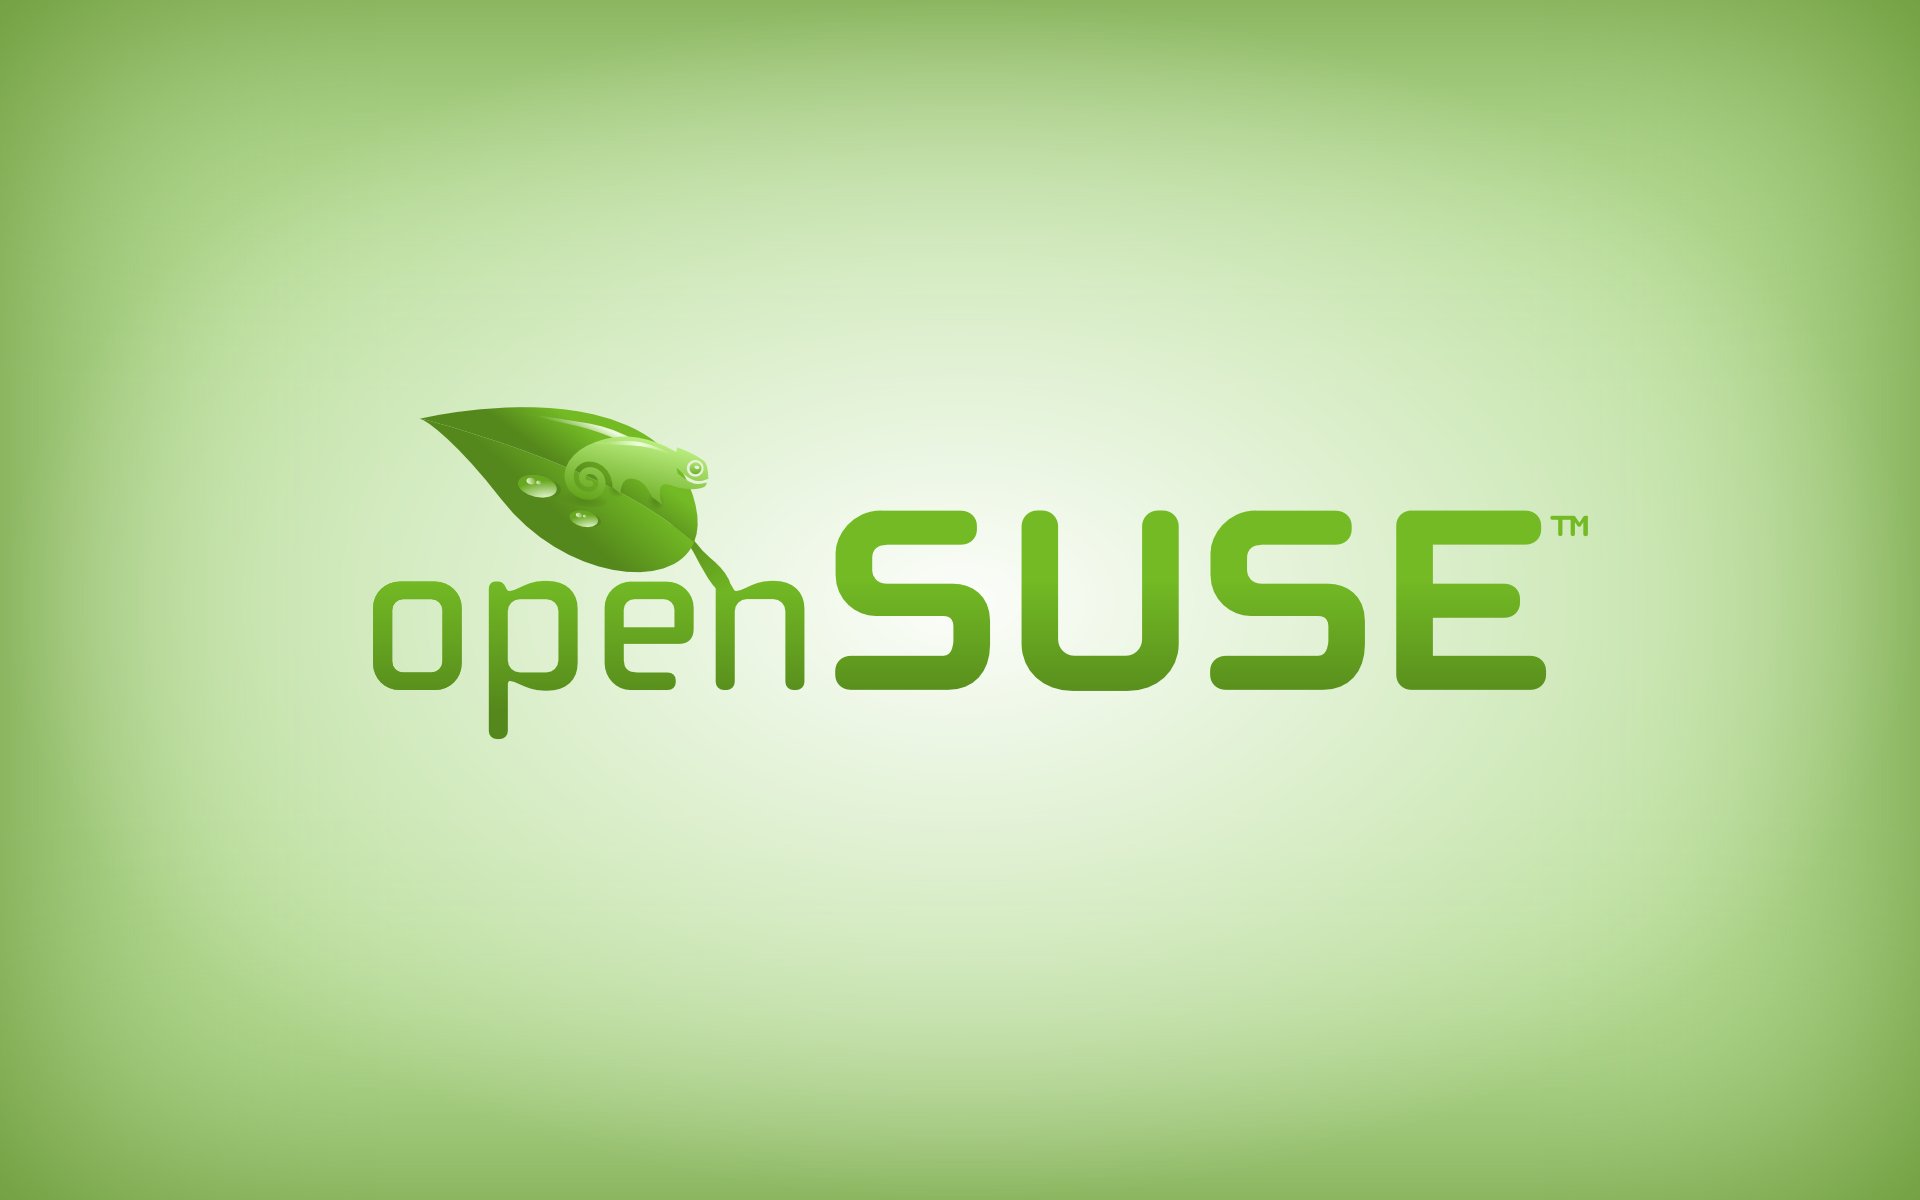 Opensuse Wallpaper Actual